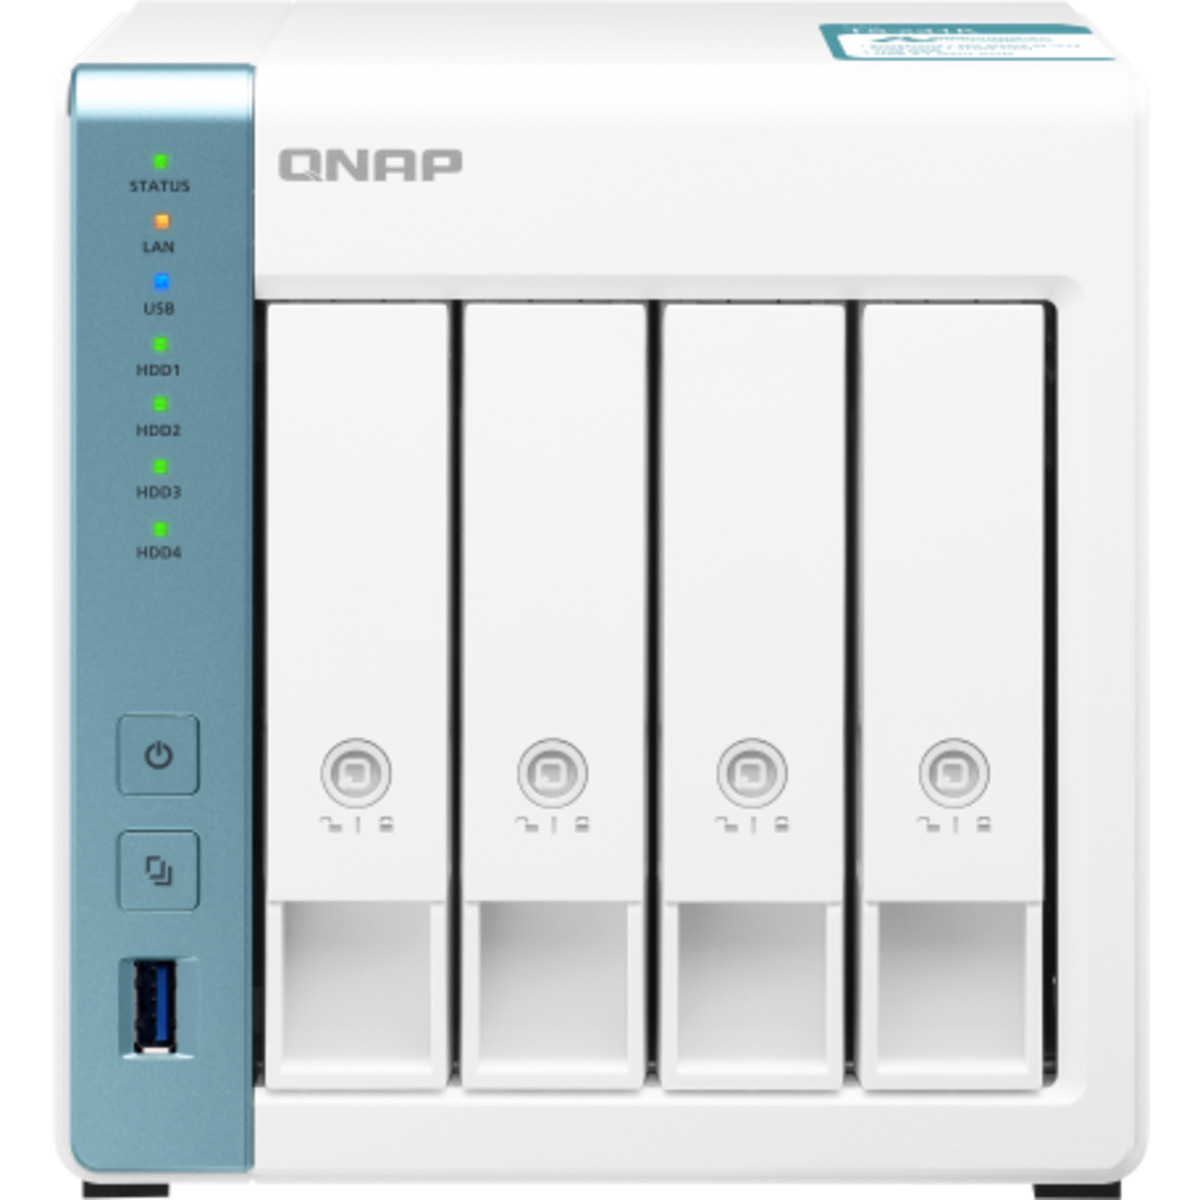 QNAP TS-431K 54tb 4-Bay Desktop Personal / Basic Home / Small Office NAS - Network Attached Storage Device 3x18tb Western Digital Gold WD181KRYZ 3.5 7200rpm SATA 6Gb/s HDD ENTERPRISE Class Drives Installed - Burn-In Tested TS-431K